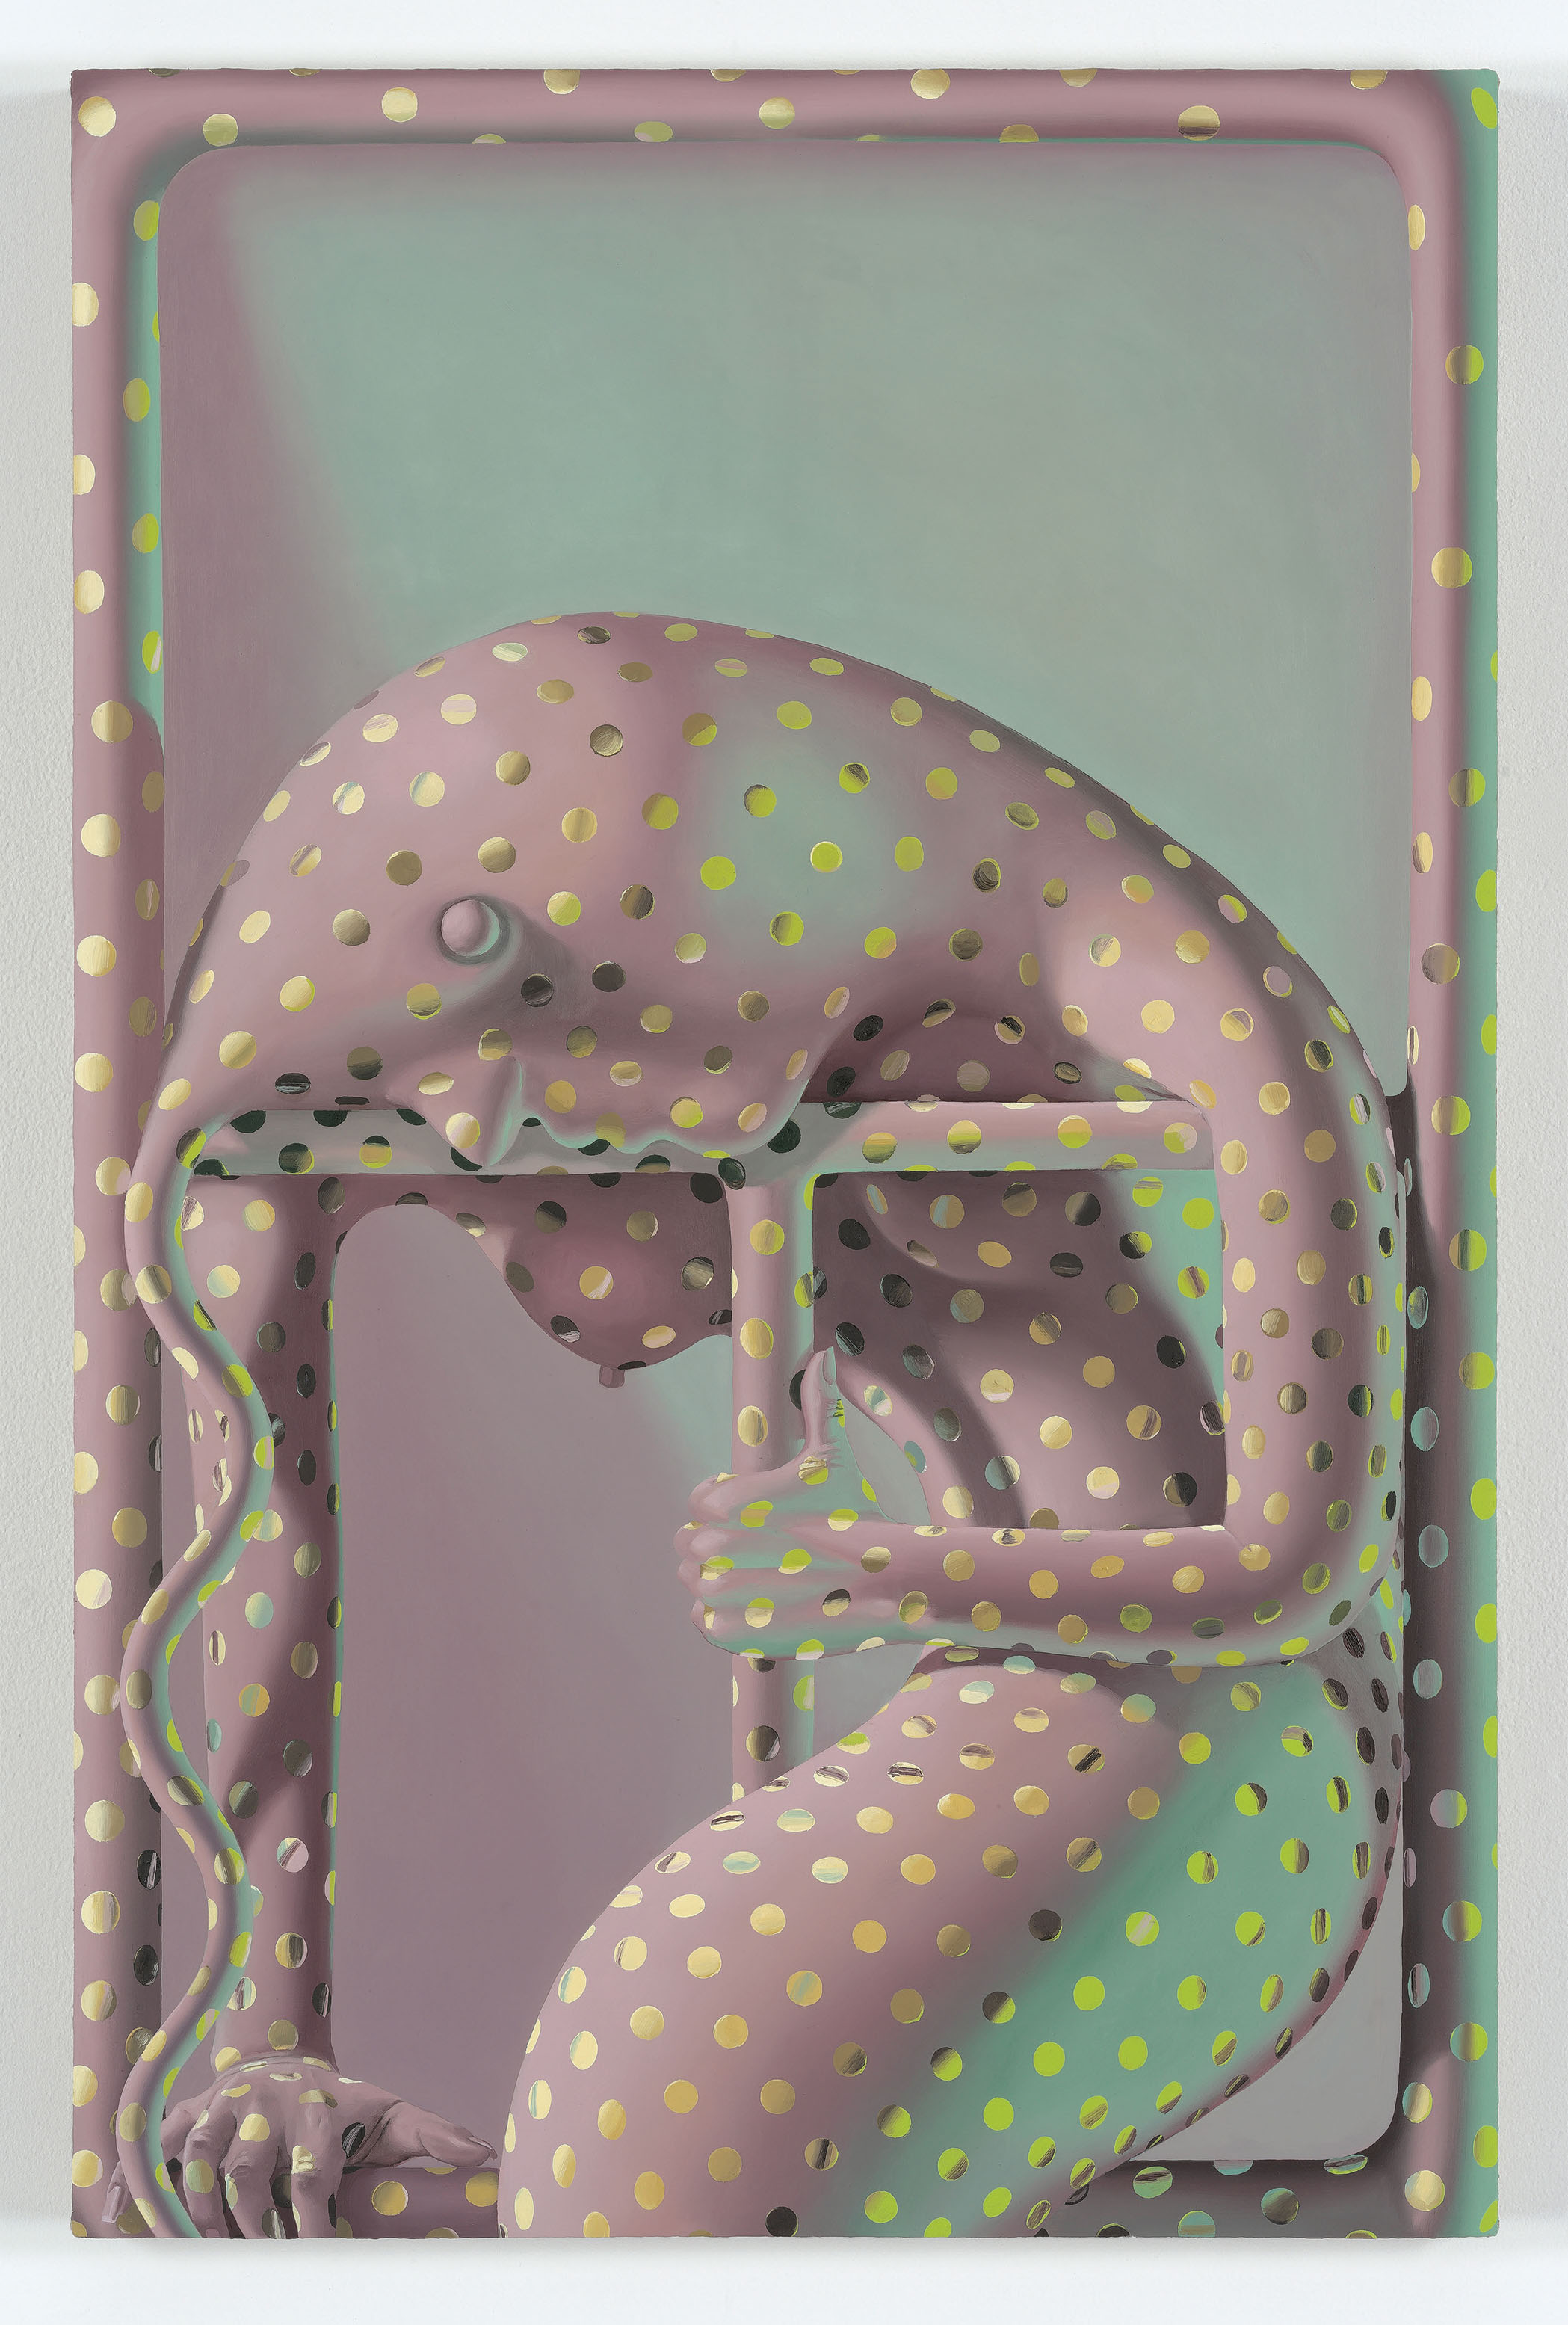 Hilt, 2015, oil on linen over panel, 81.28 x 53.34 cm Courtesy Foxy Production and the artist